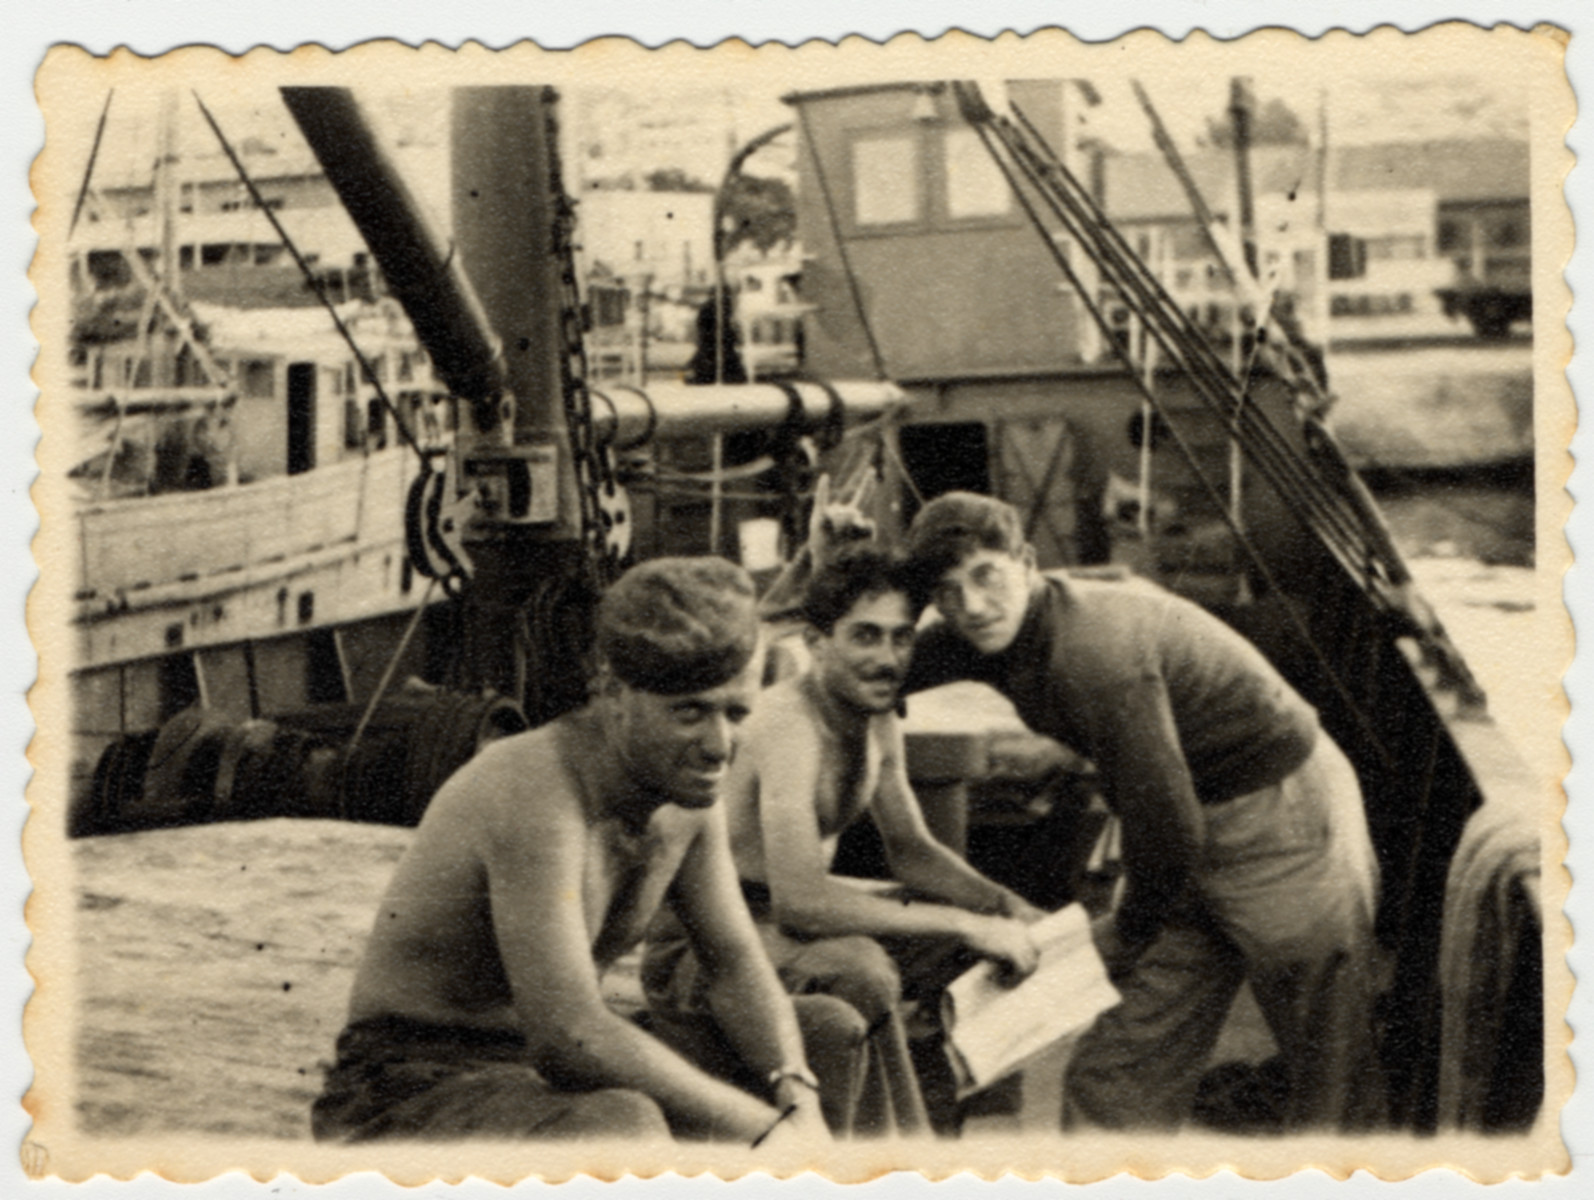 Three crew members of the SS Hannah Szenes relax on a dock in Haifa harbor.

Myron Goldstein is leaning over on the far right.